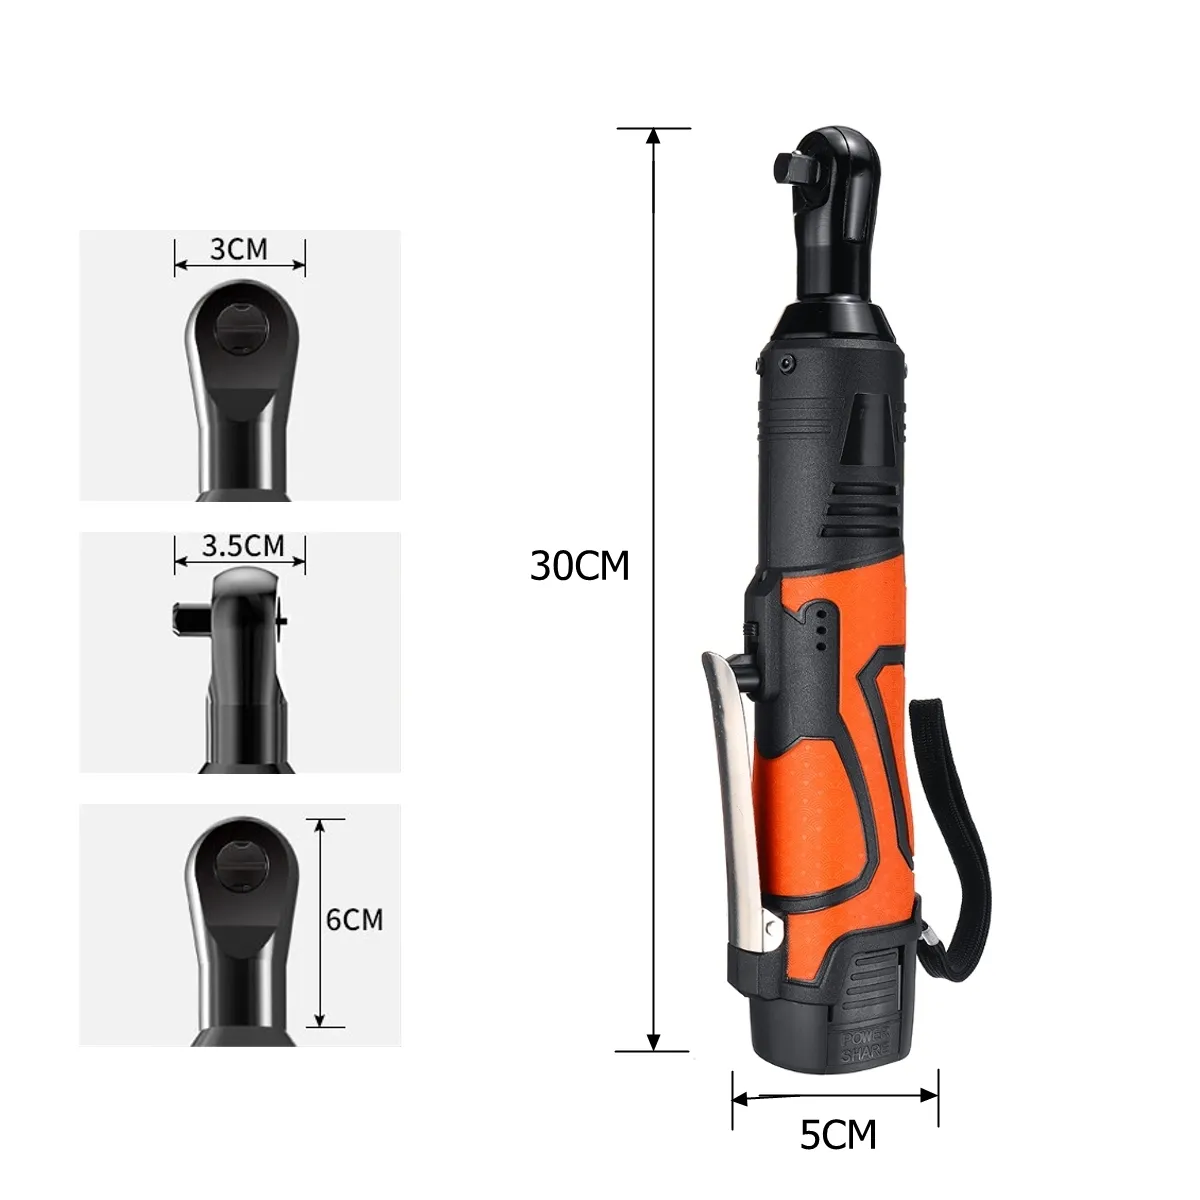 Portable 18V Cordless Electric Wrench 38039039 60Nm Rechargeable Ratchet 90 degree Right Angle Wrench Power tools Set Y2001170817